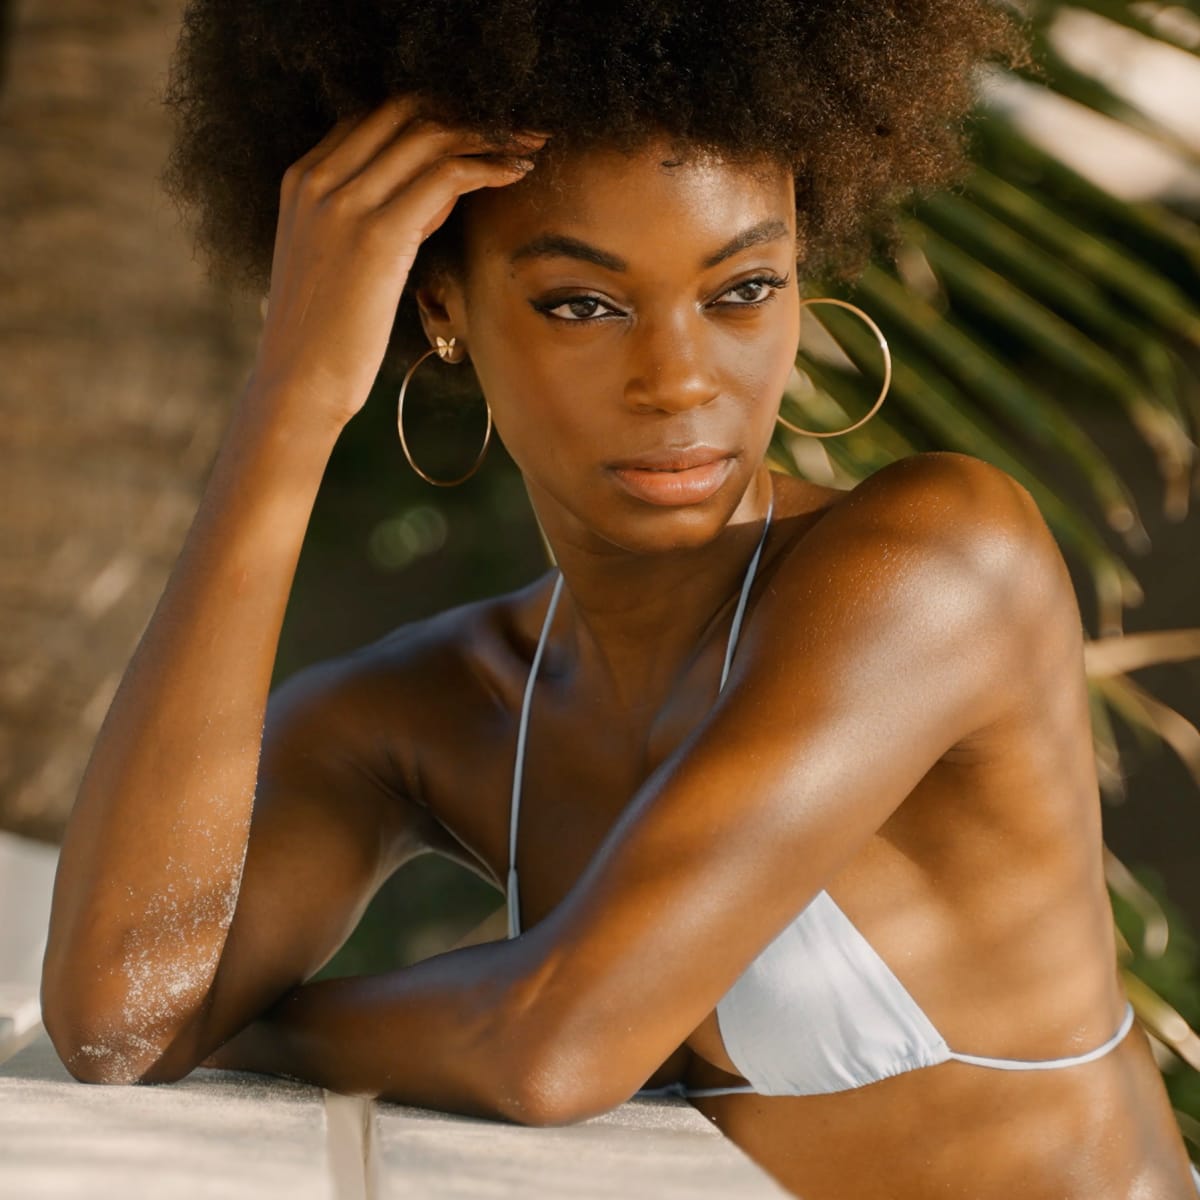 SI Swimsuit 2020 Swim Search: Tanaye White in Sports Illustrated Swimsuit  with - (ID:64712) - Fashion Editorial, Magazines